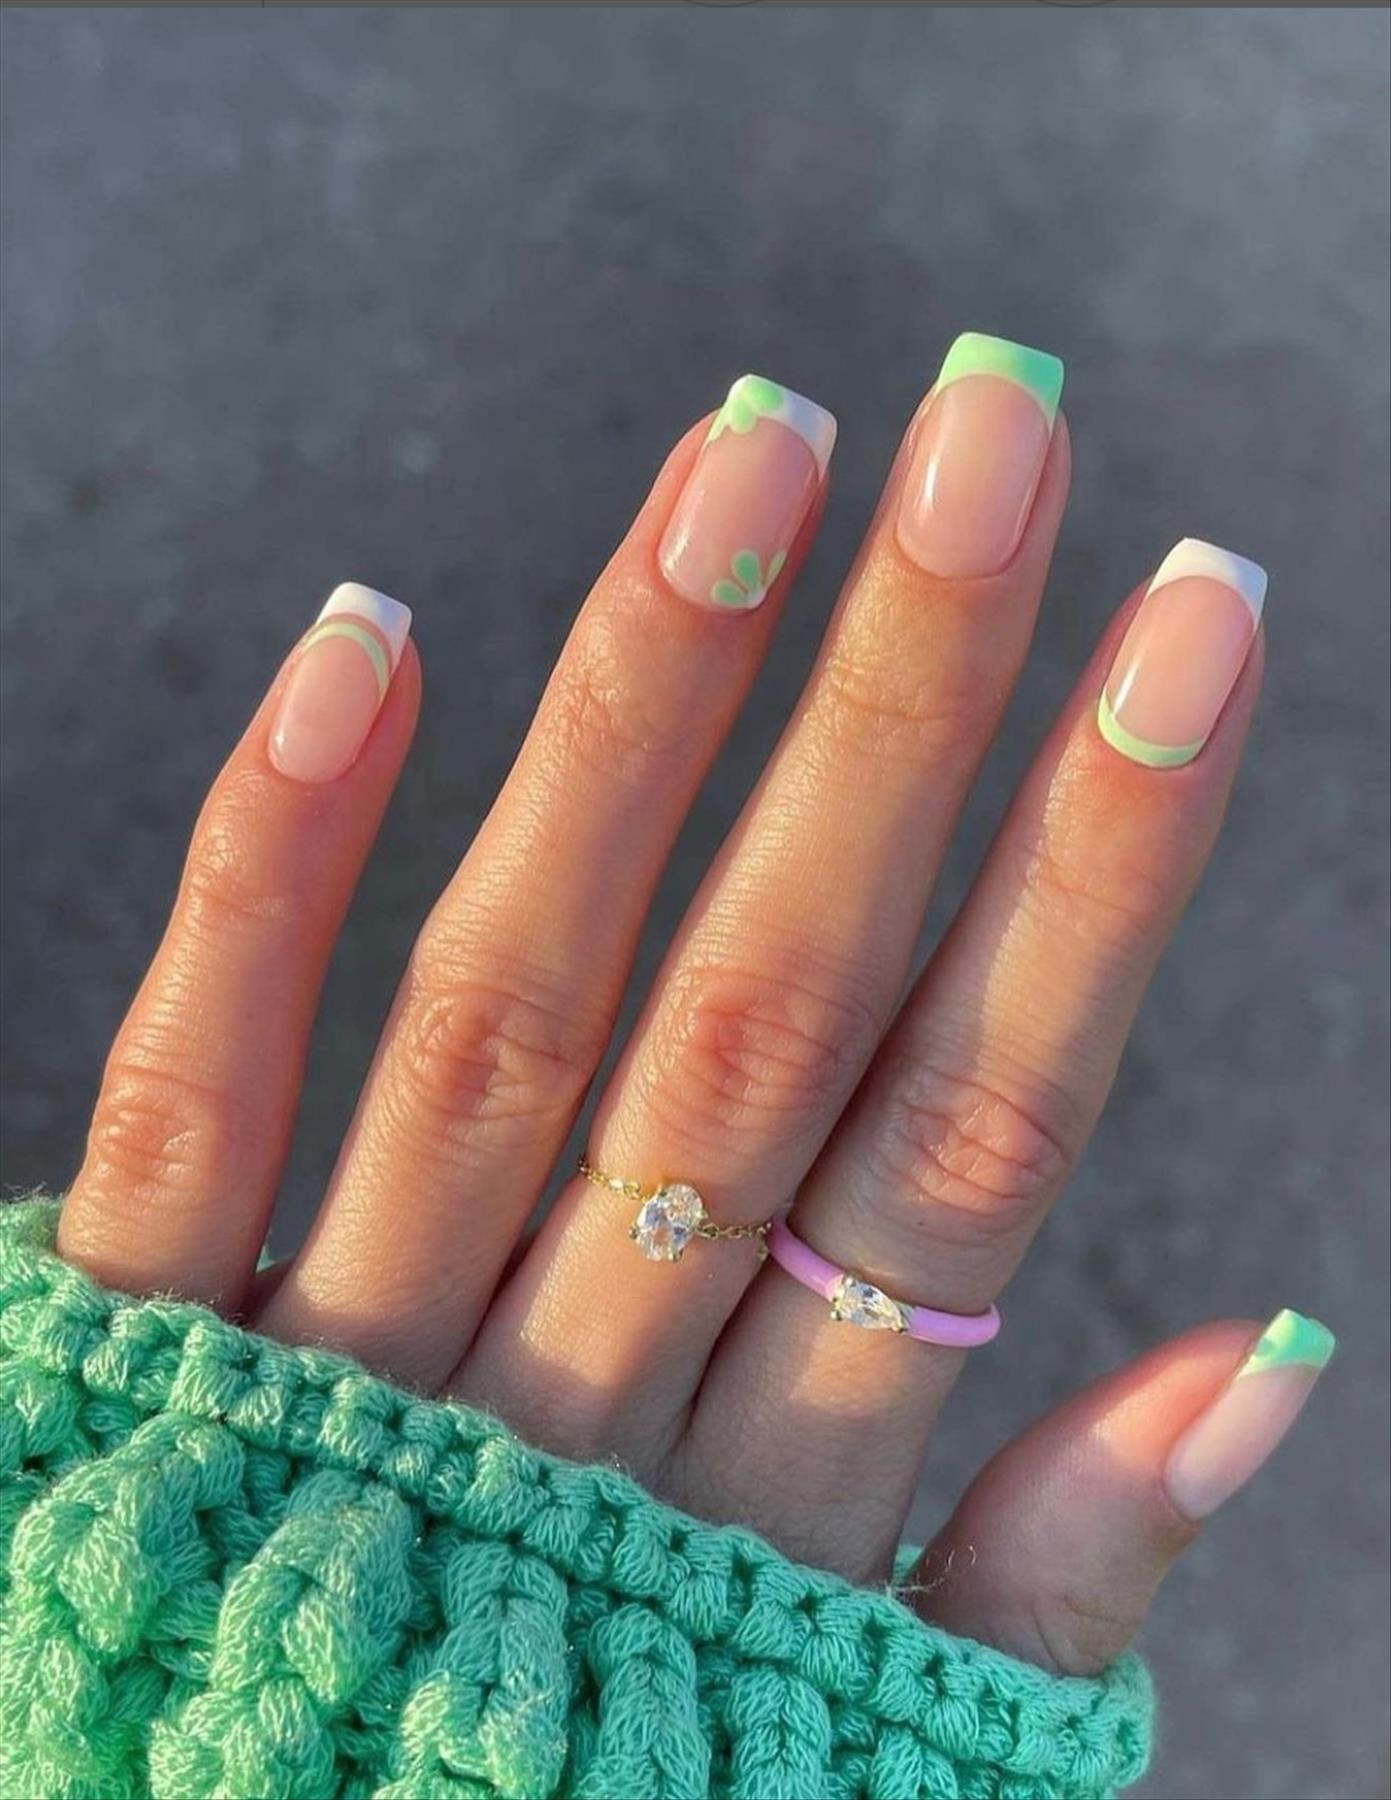 Beautiful Spring flower nails design you'll love